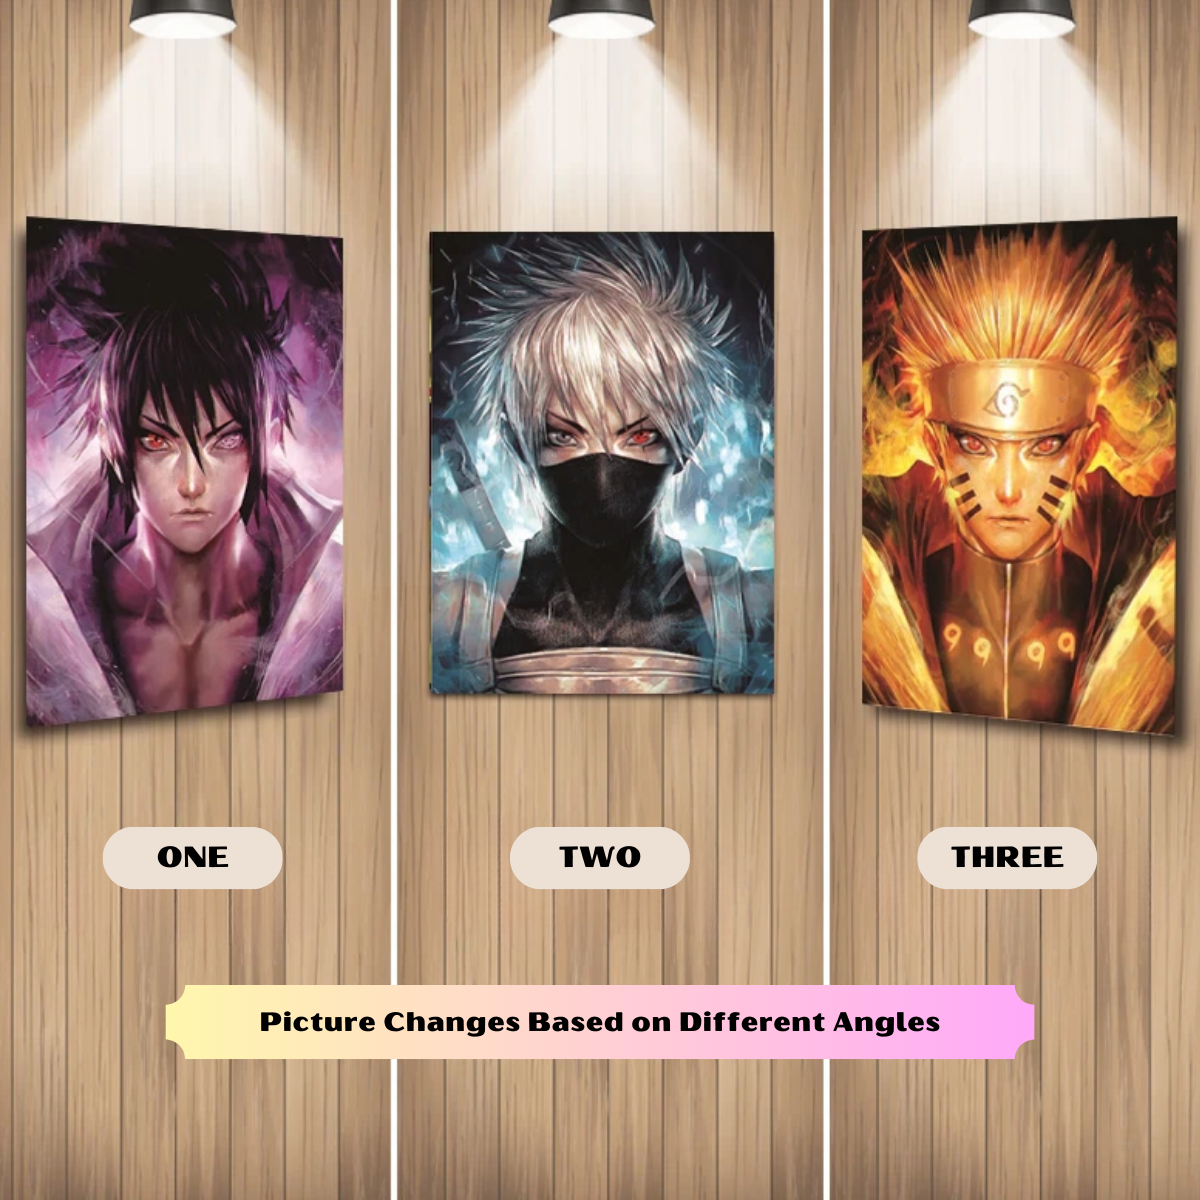 3D Anime Posters: 3D Lenticular Anime Posters - PriceFrack